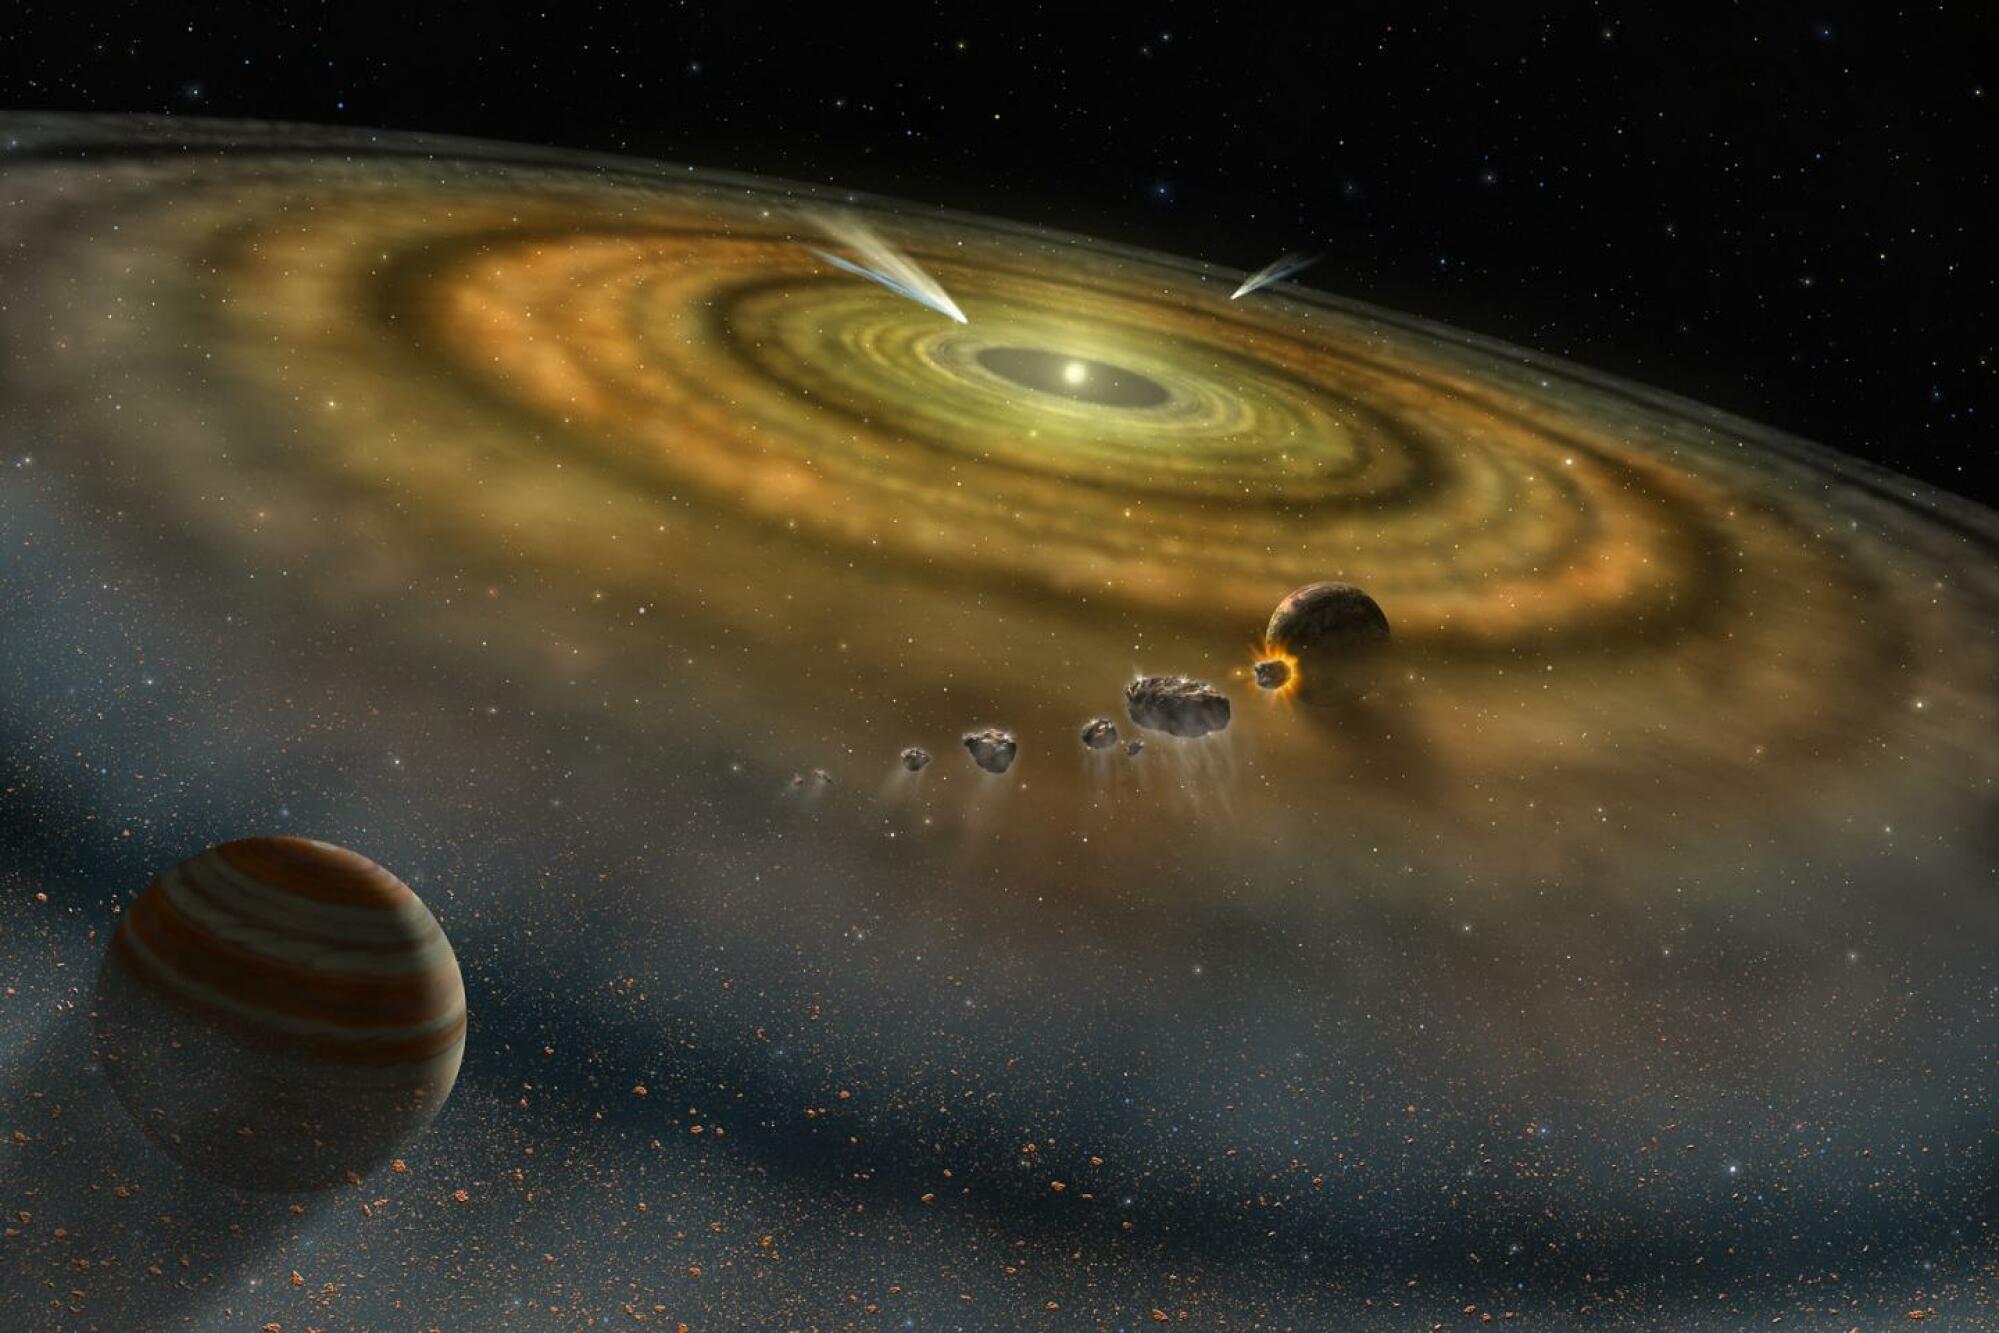 An artist's depiction of objects colliding in the distant solar system Beta Pictoris.